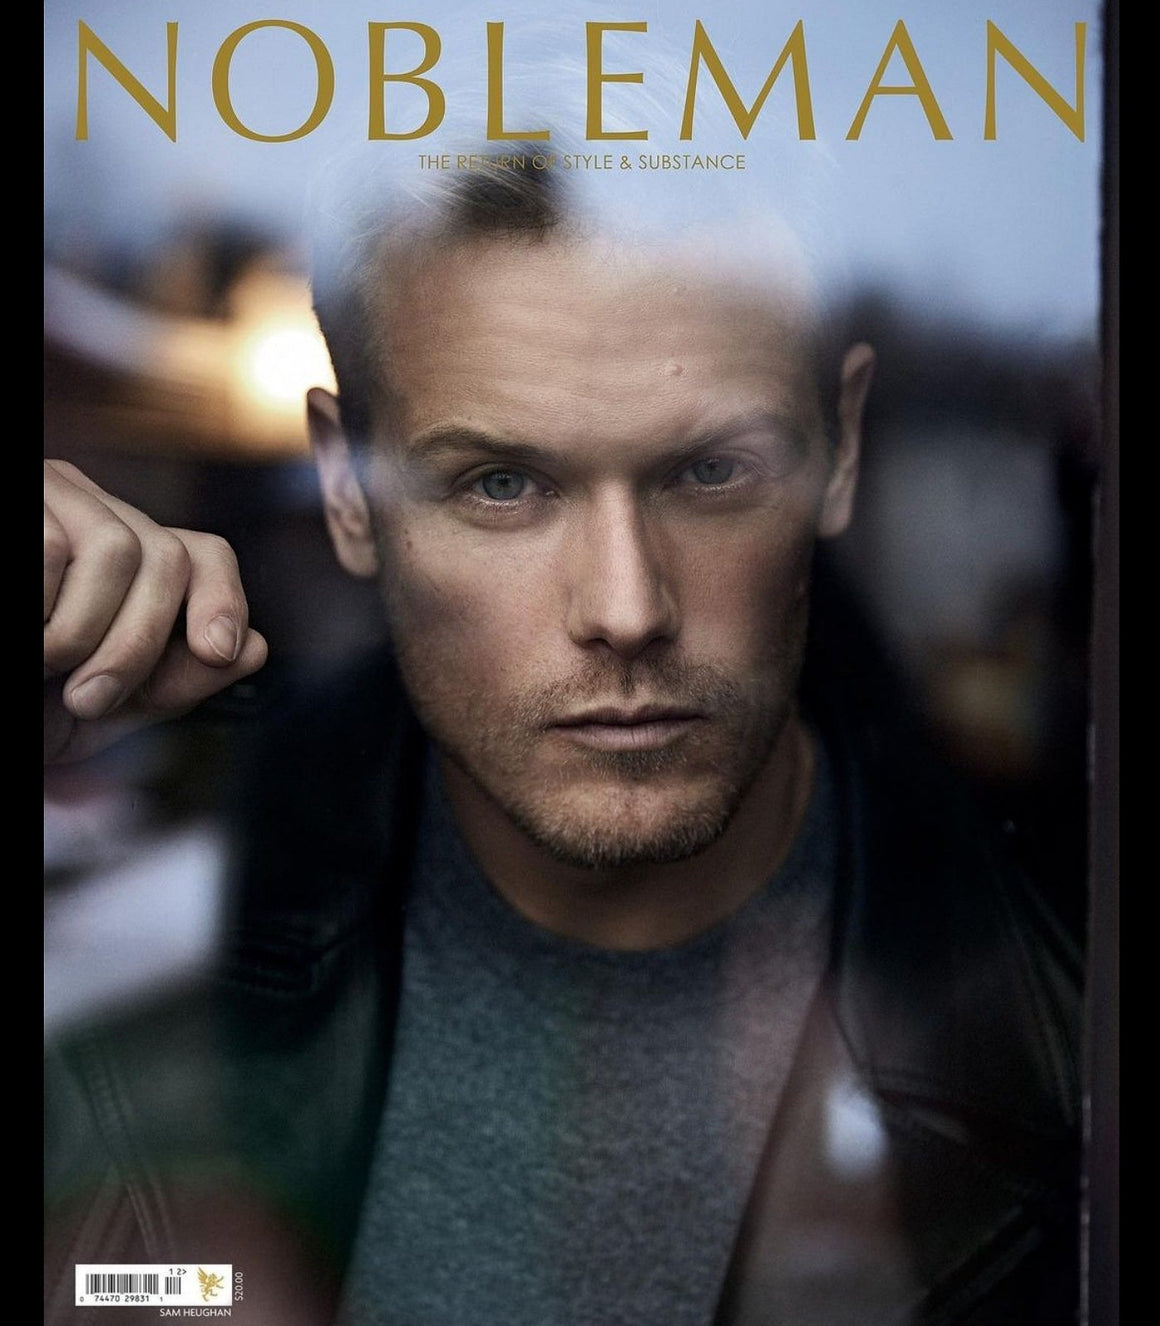 Nobleman Magazine No. 18 Sam Heughan Cover #2 (US CUSTOMERS Only)